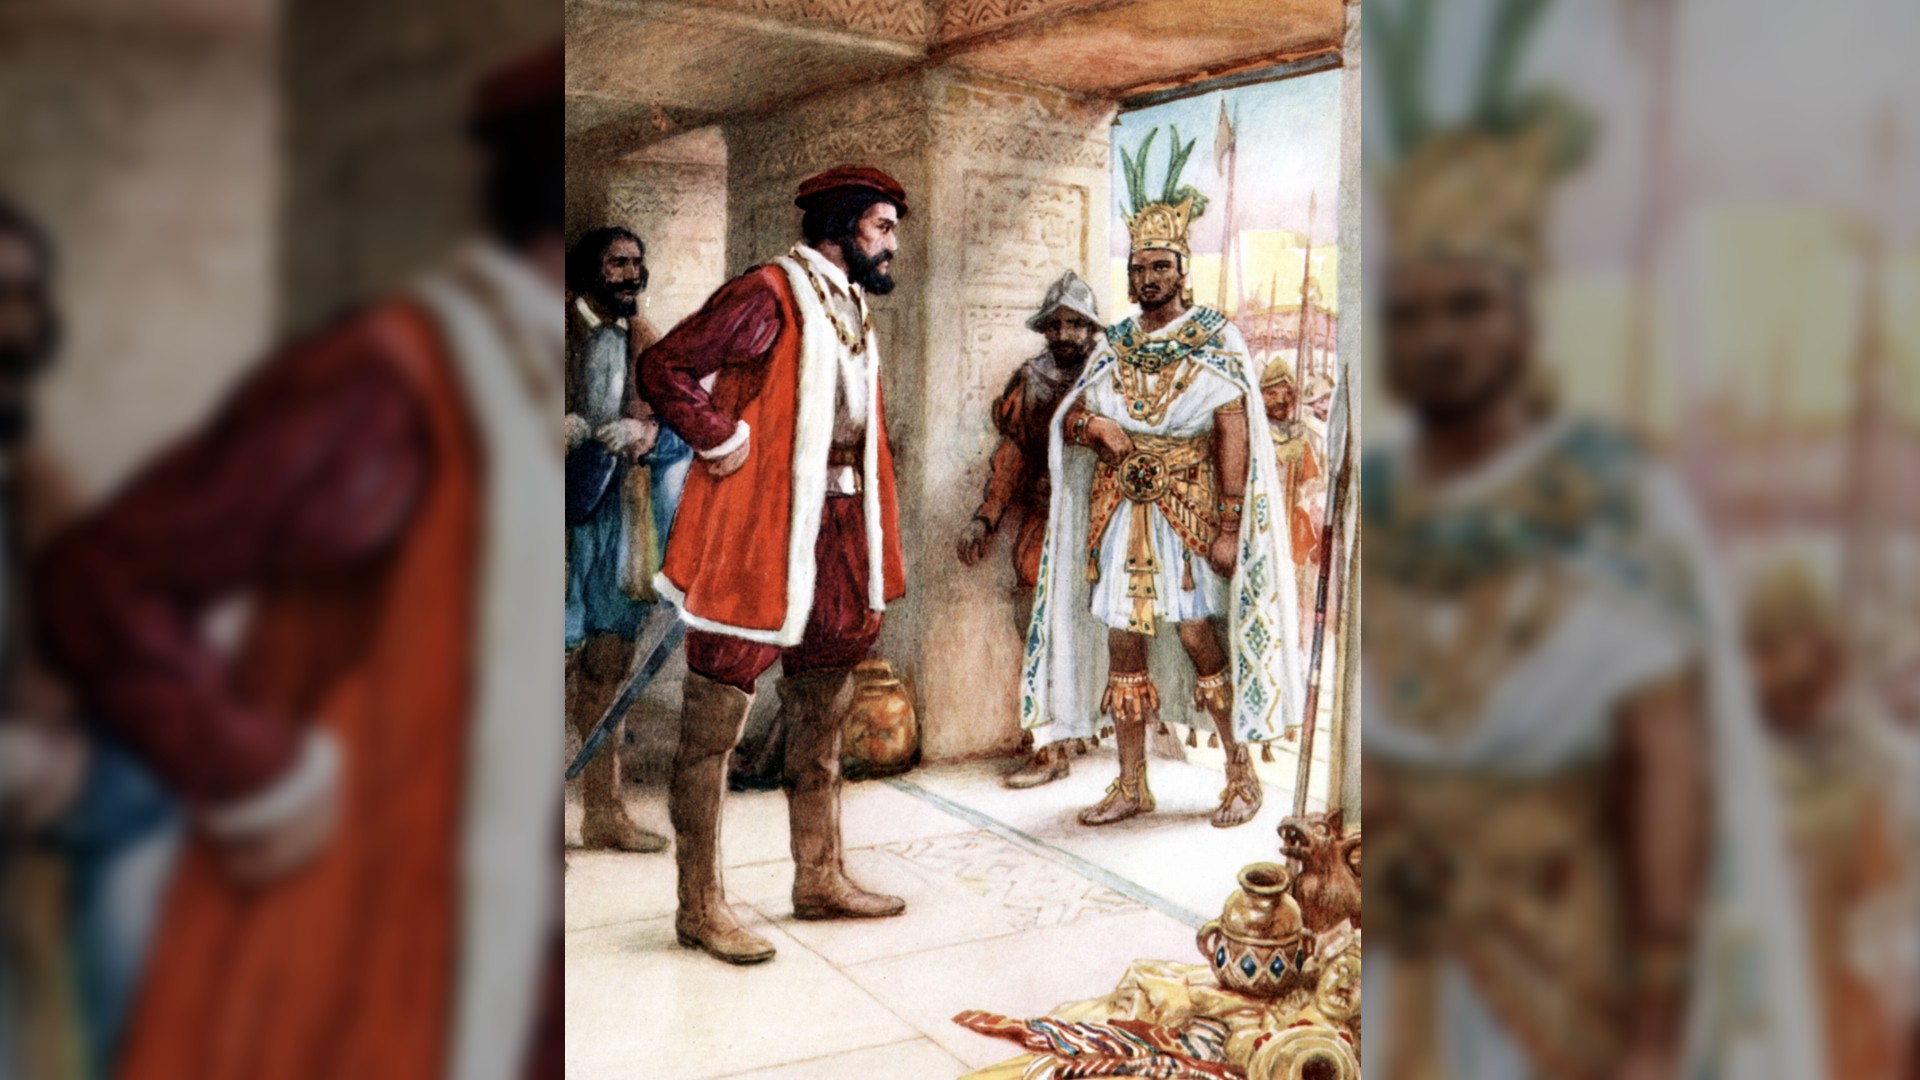 A painting of Hernando Cortez with Aztec Emperor Montezuma II. On the left is Hernando wearing red trousers, red shirt and a red waistcoat lined with white fur. On the right, standing in a doorway, is the Aztec Emperor Montezuma II. He is wearing a white tunic and long white cape. HE is adorned with a lot of gold, found on his belt, neck, sandels and his helmet. On the floor there are some treasures such as pots and fabrics.